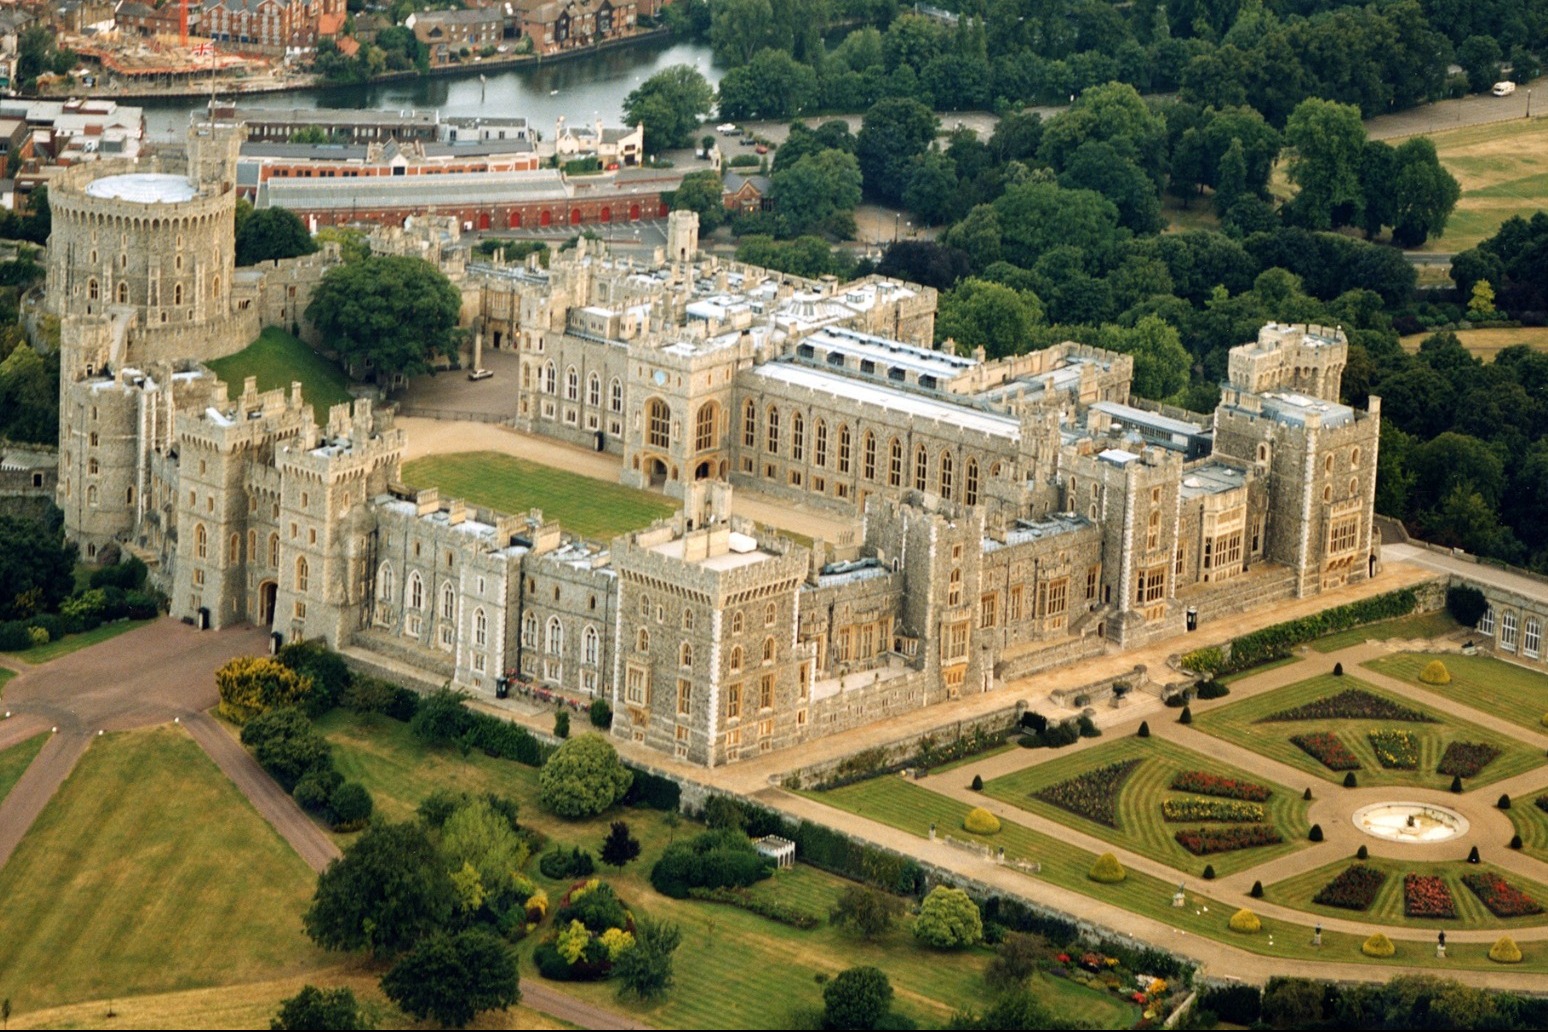 Arrest after Christmas Day security breach within Windsor Castle grounds 